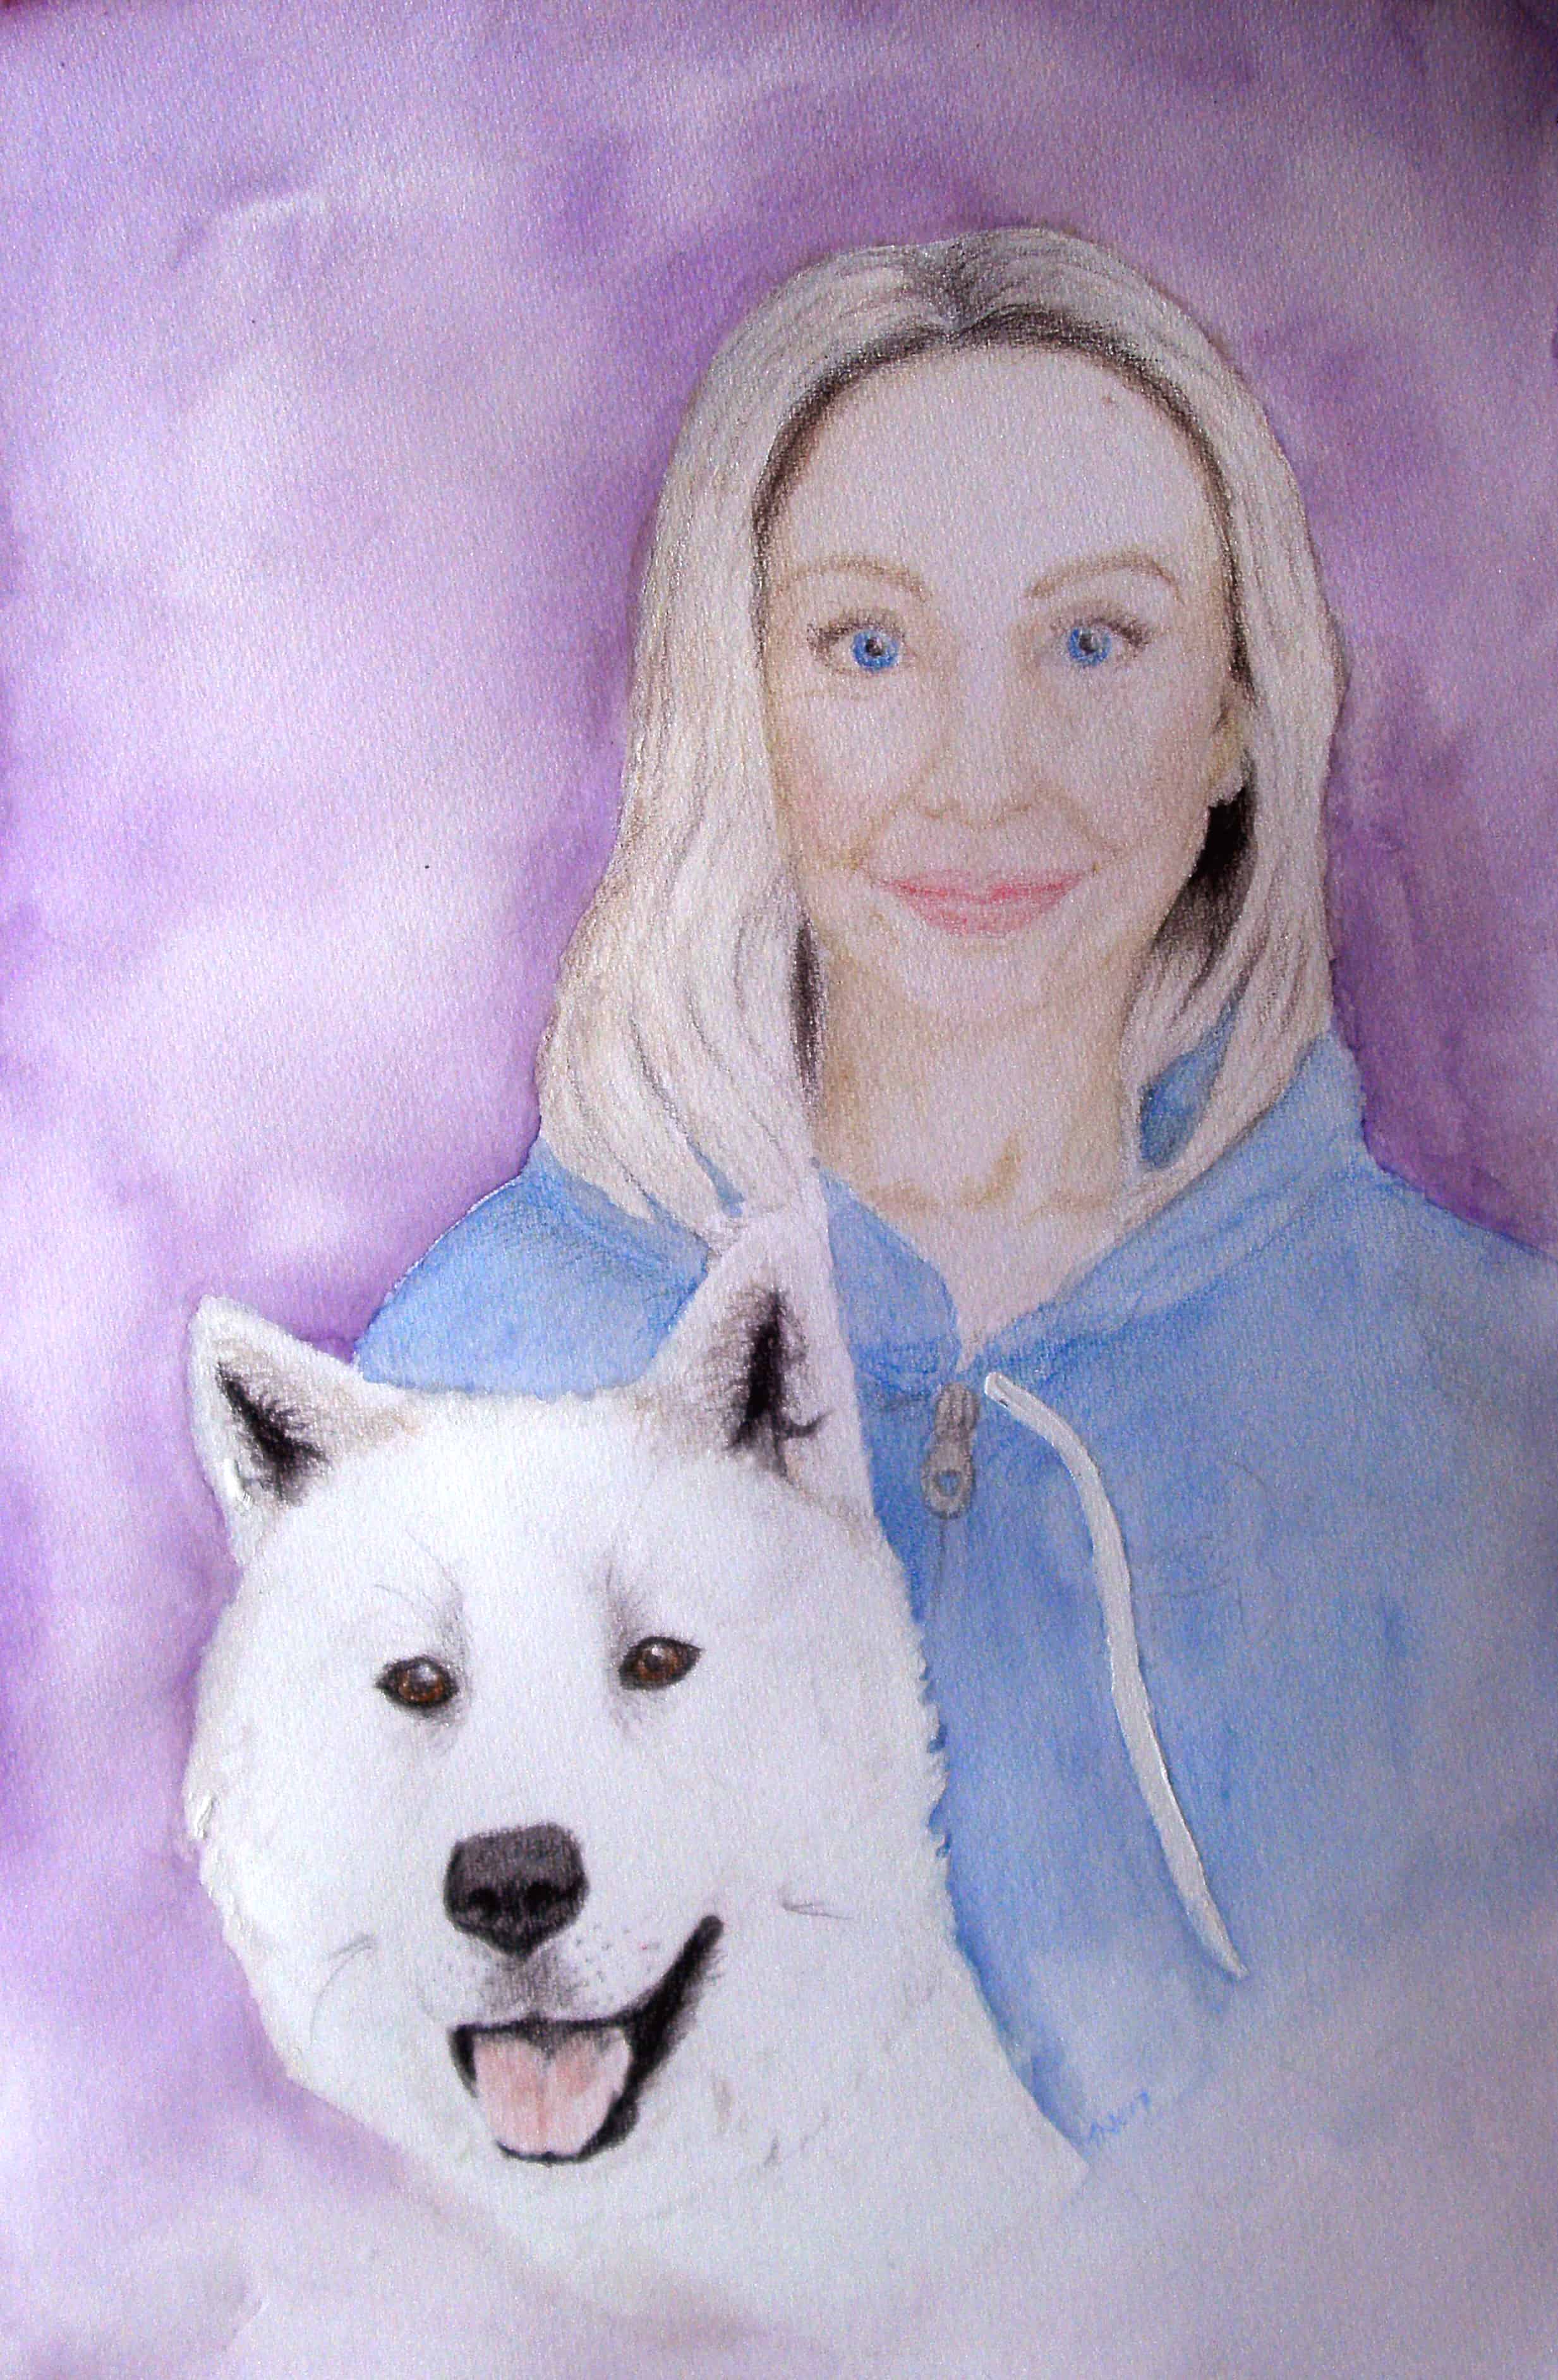 A Blonde From Finland and Her Spirit Animal